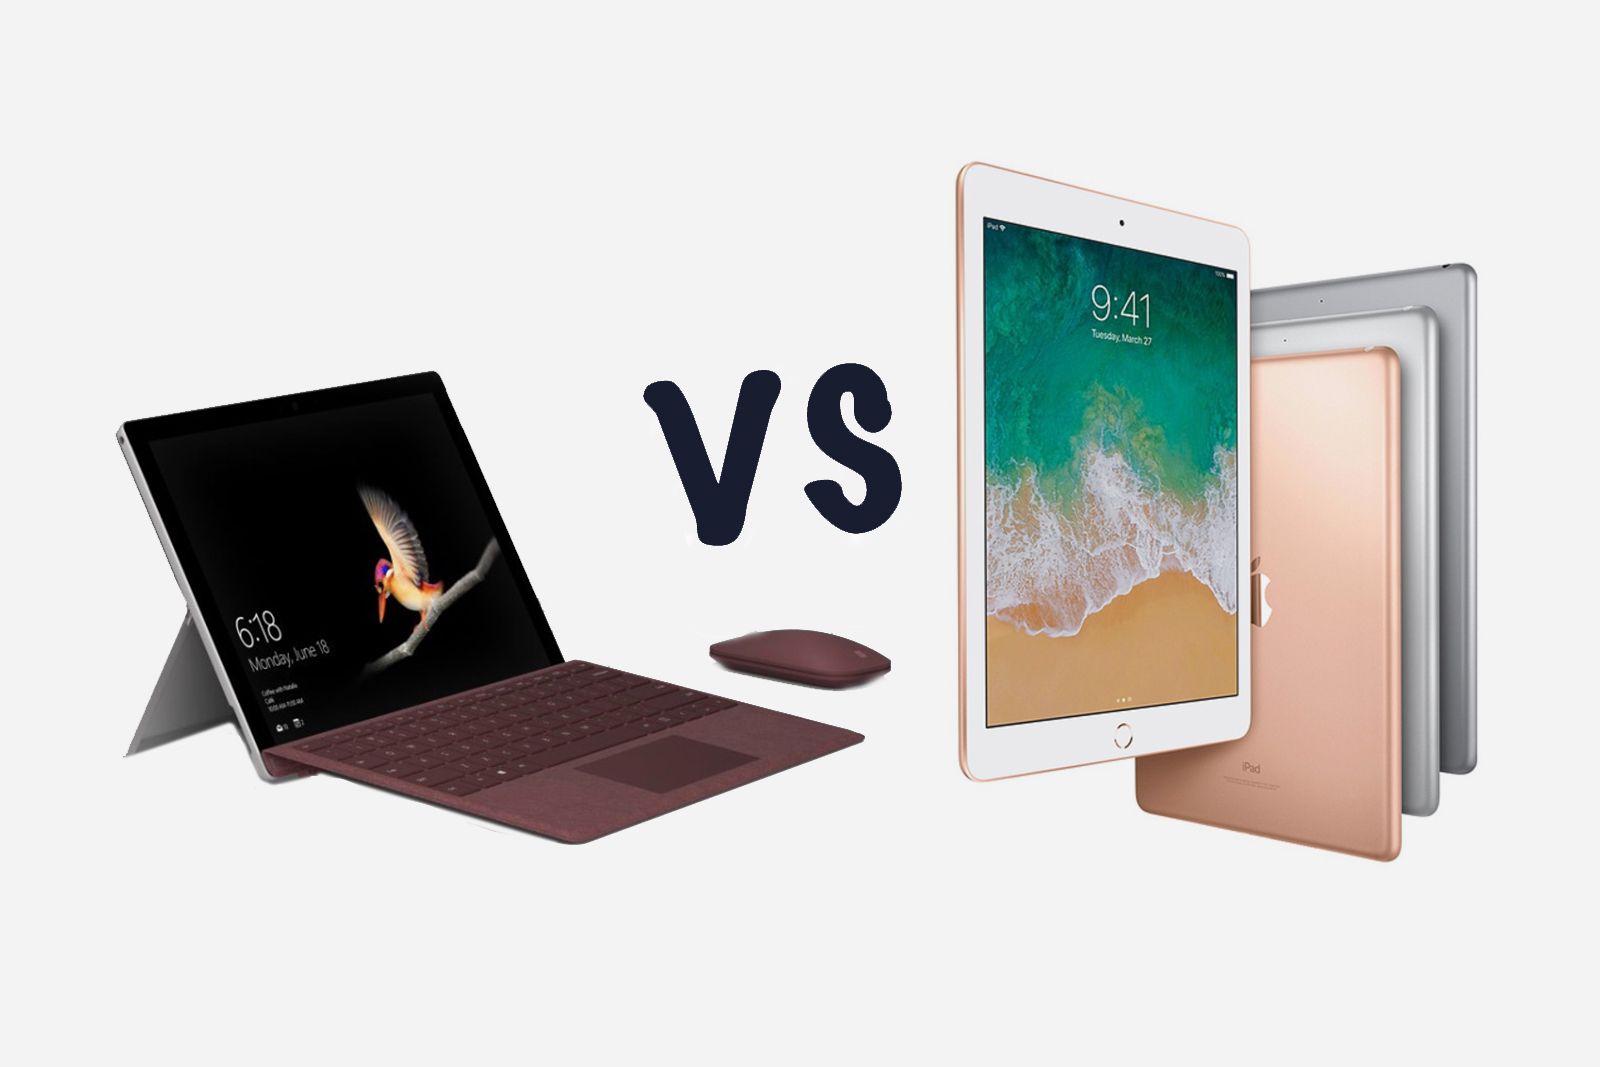 Microsoft Surface Go vs Apple iPad 97 2018 Whats the difference image 1